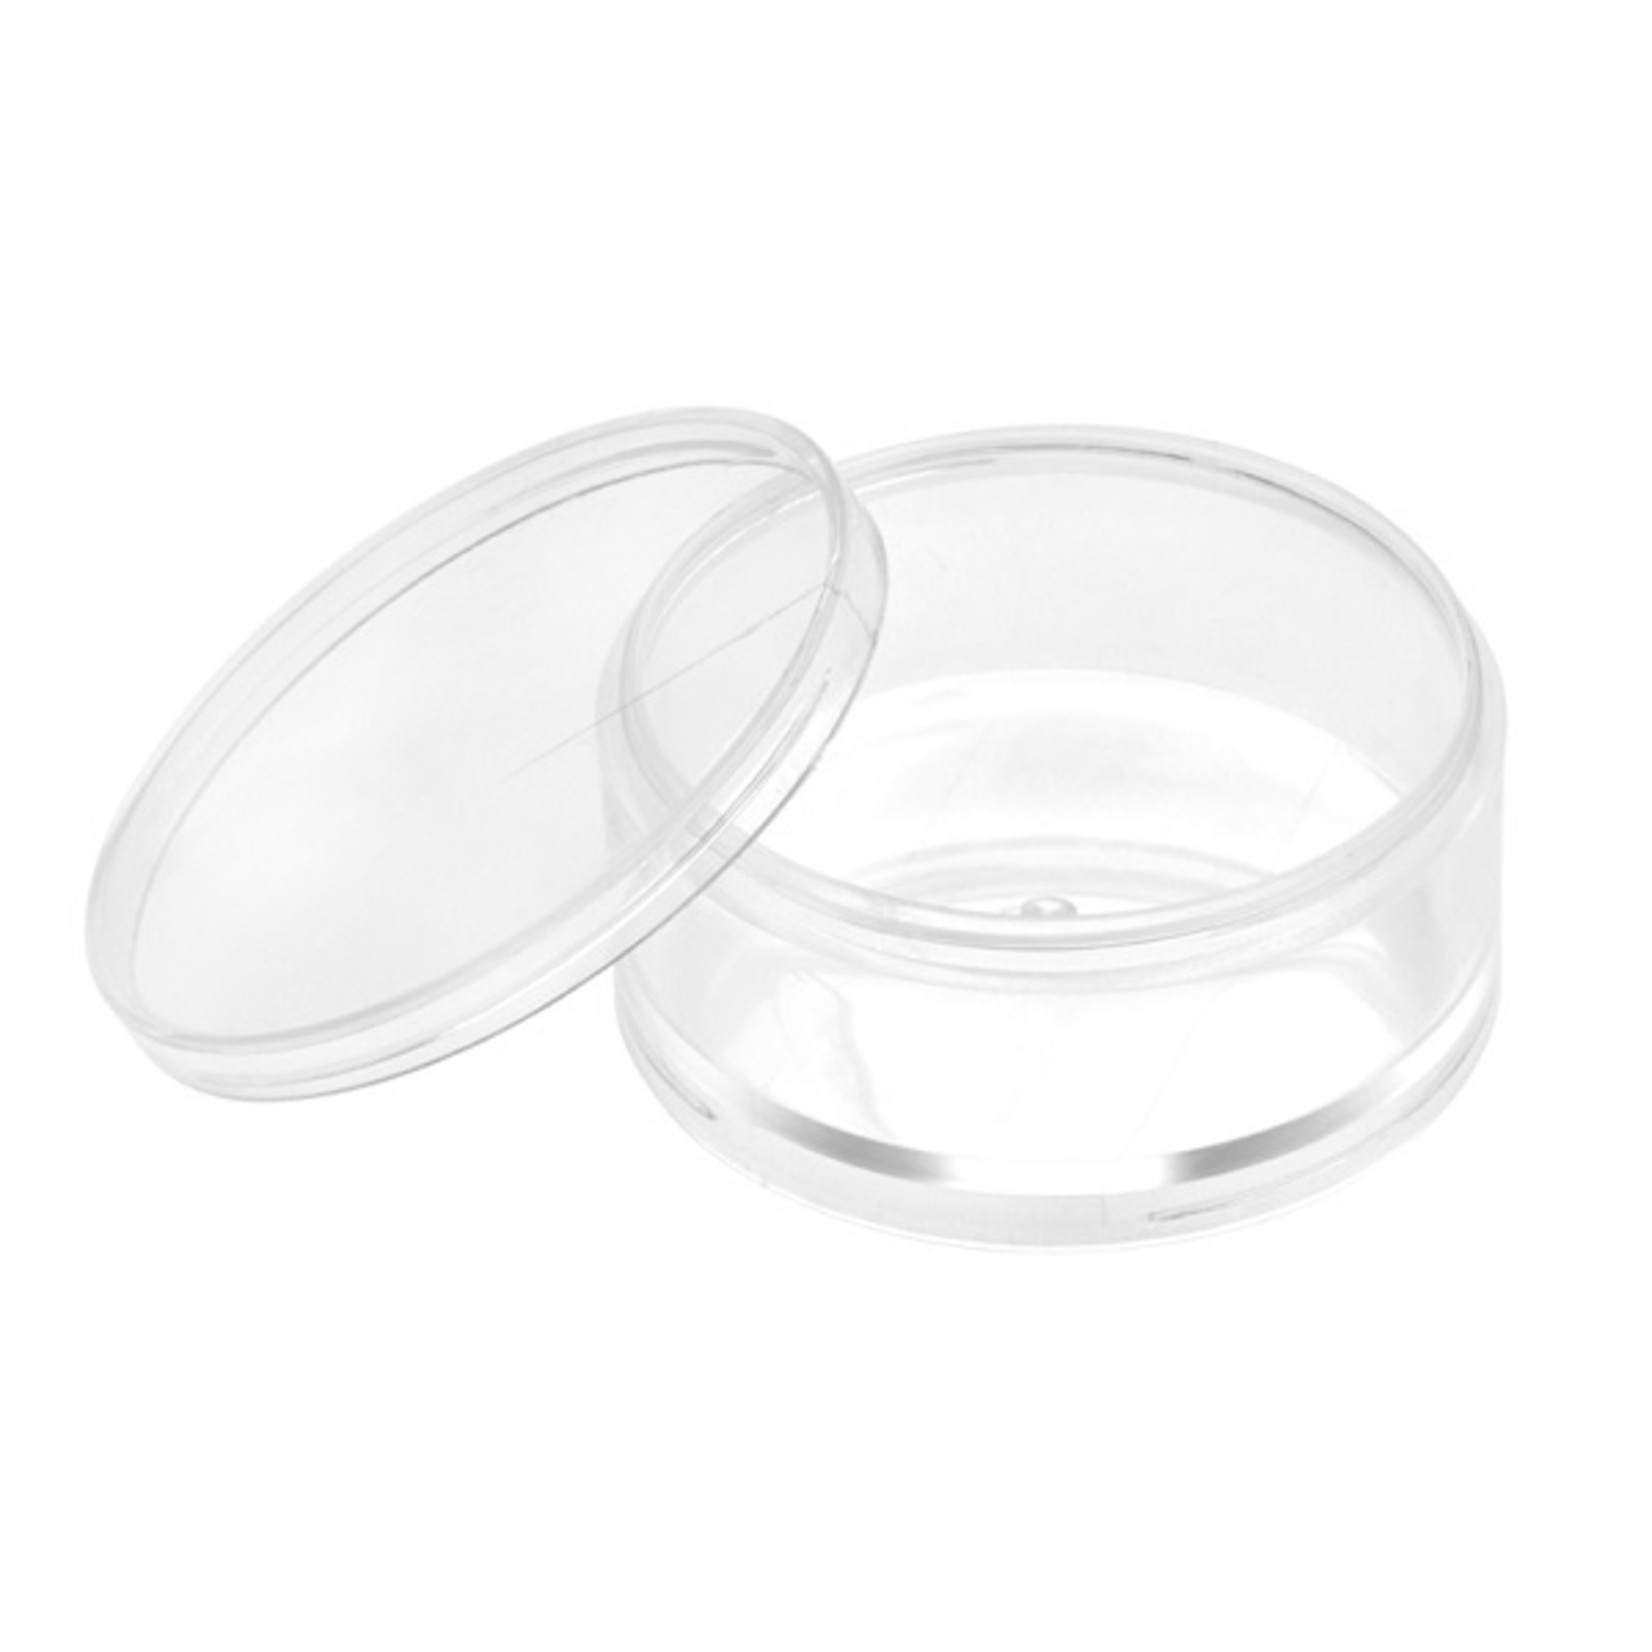 Sona SE 4 ct. Stackable & Screw-On Round Containers - 2 3/4" x 1"